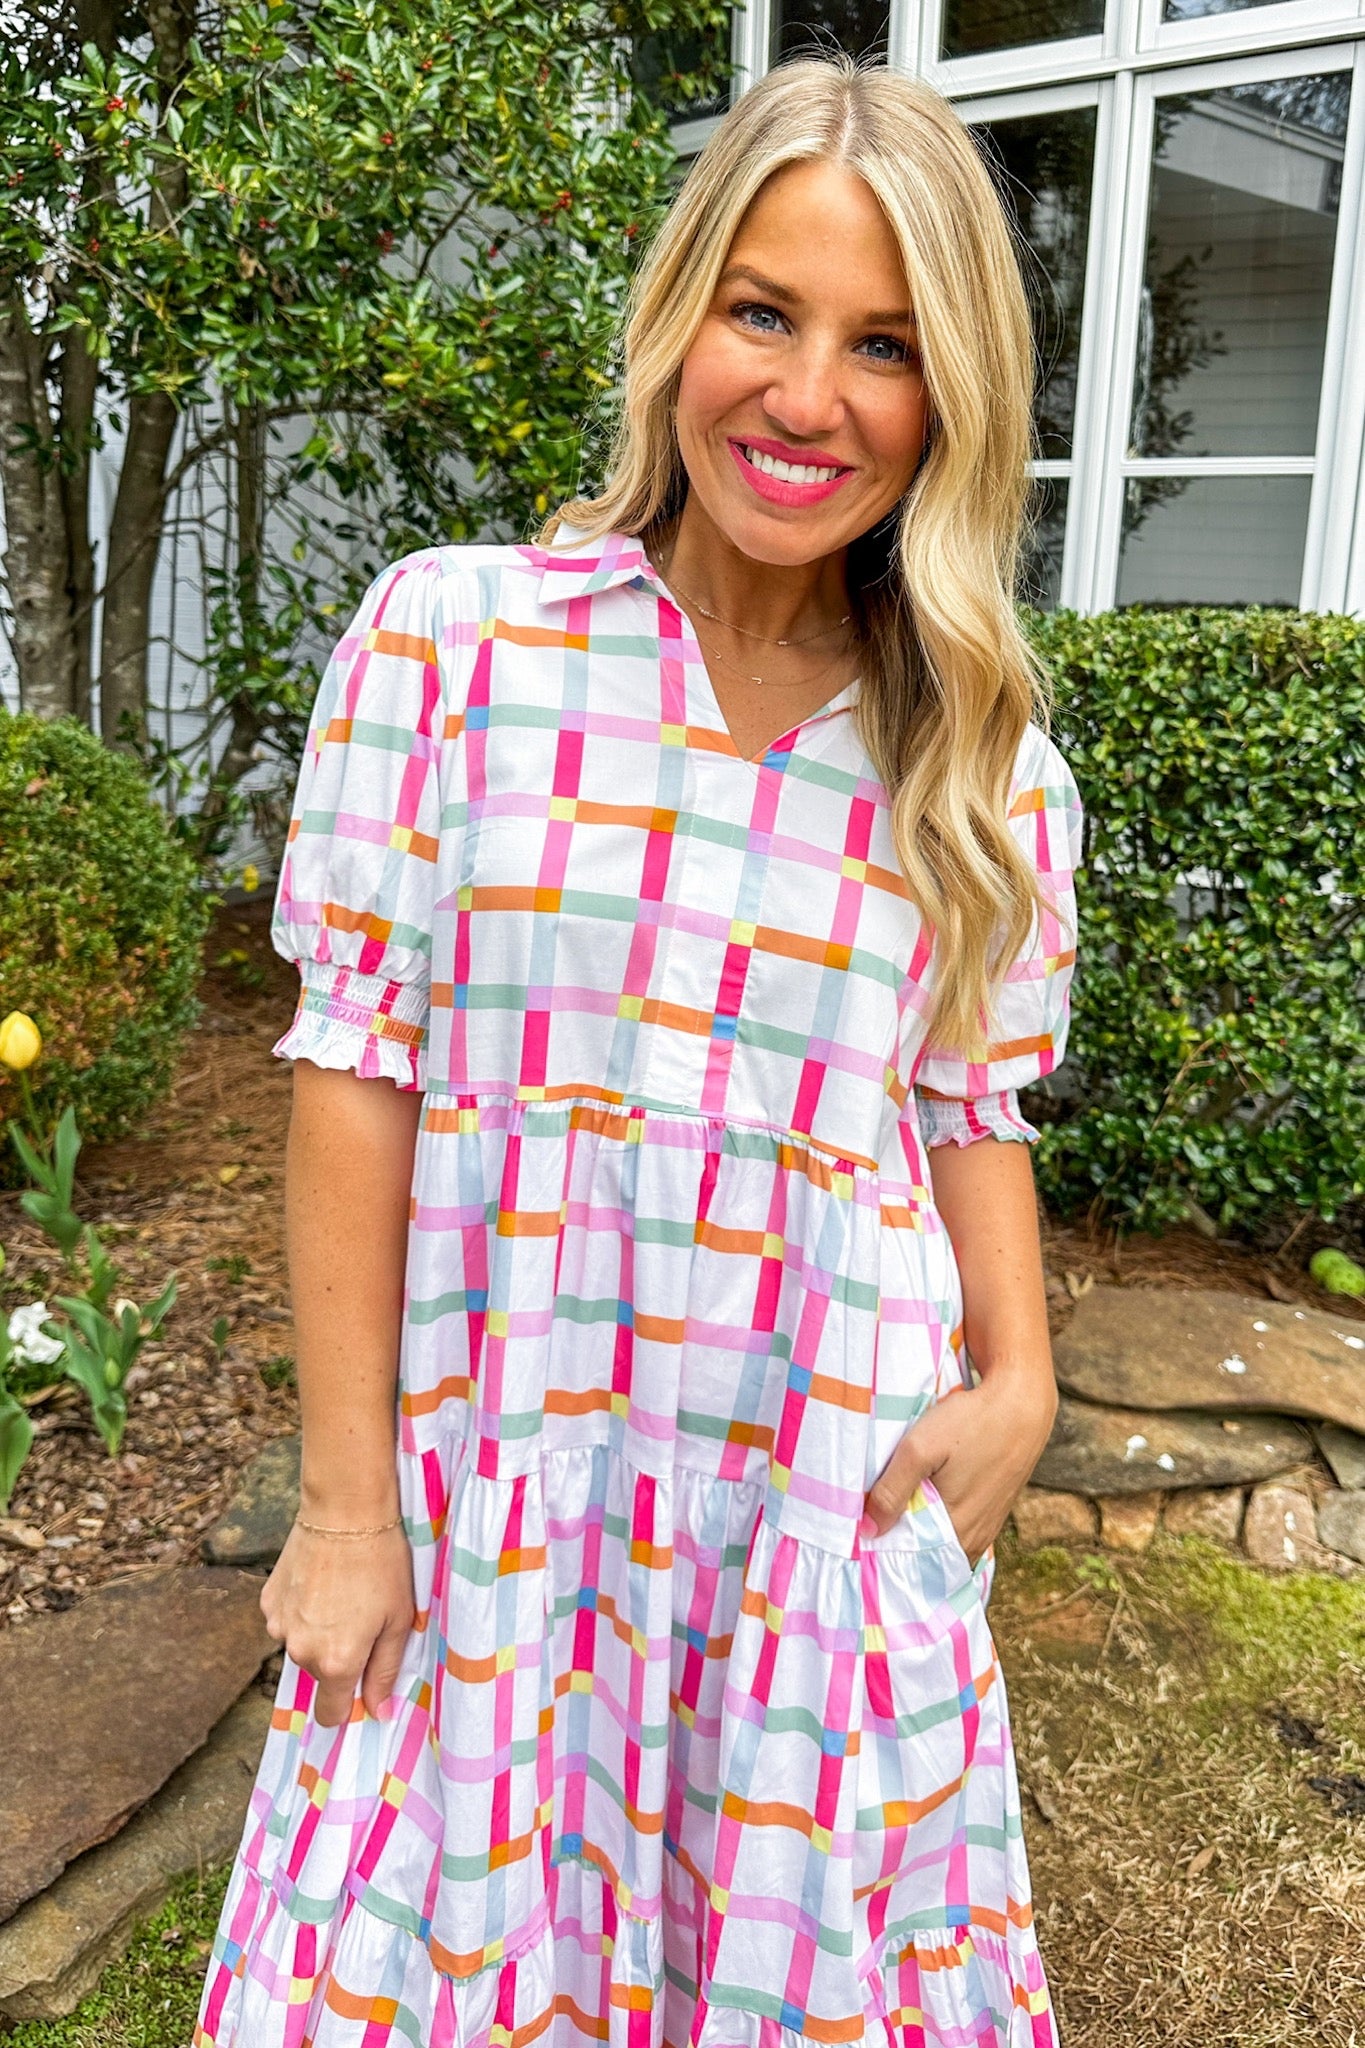 The Molly Look Me Up Multi Color Tiered Midi Dress by Michelle McDowell